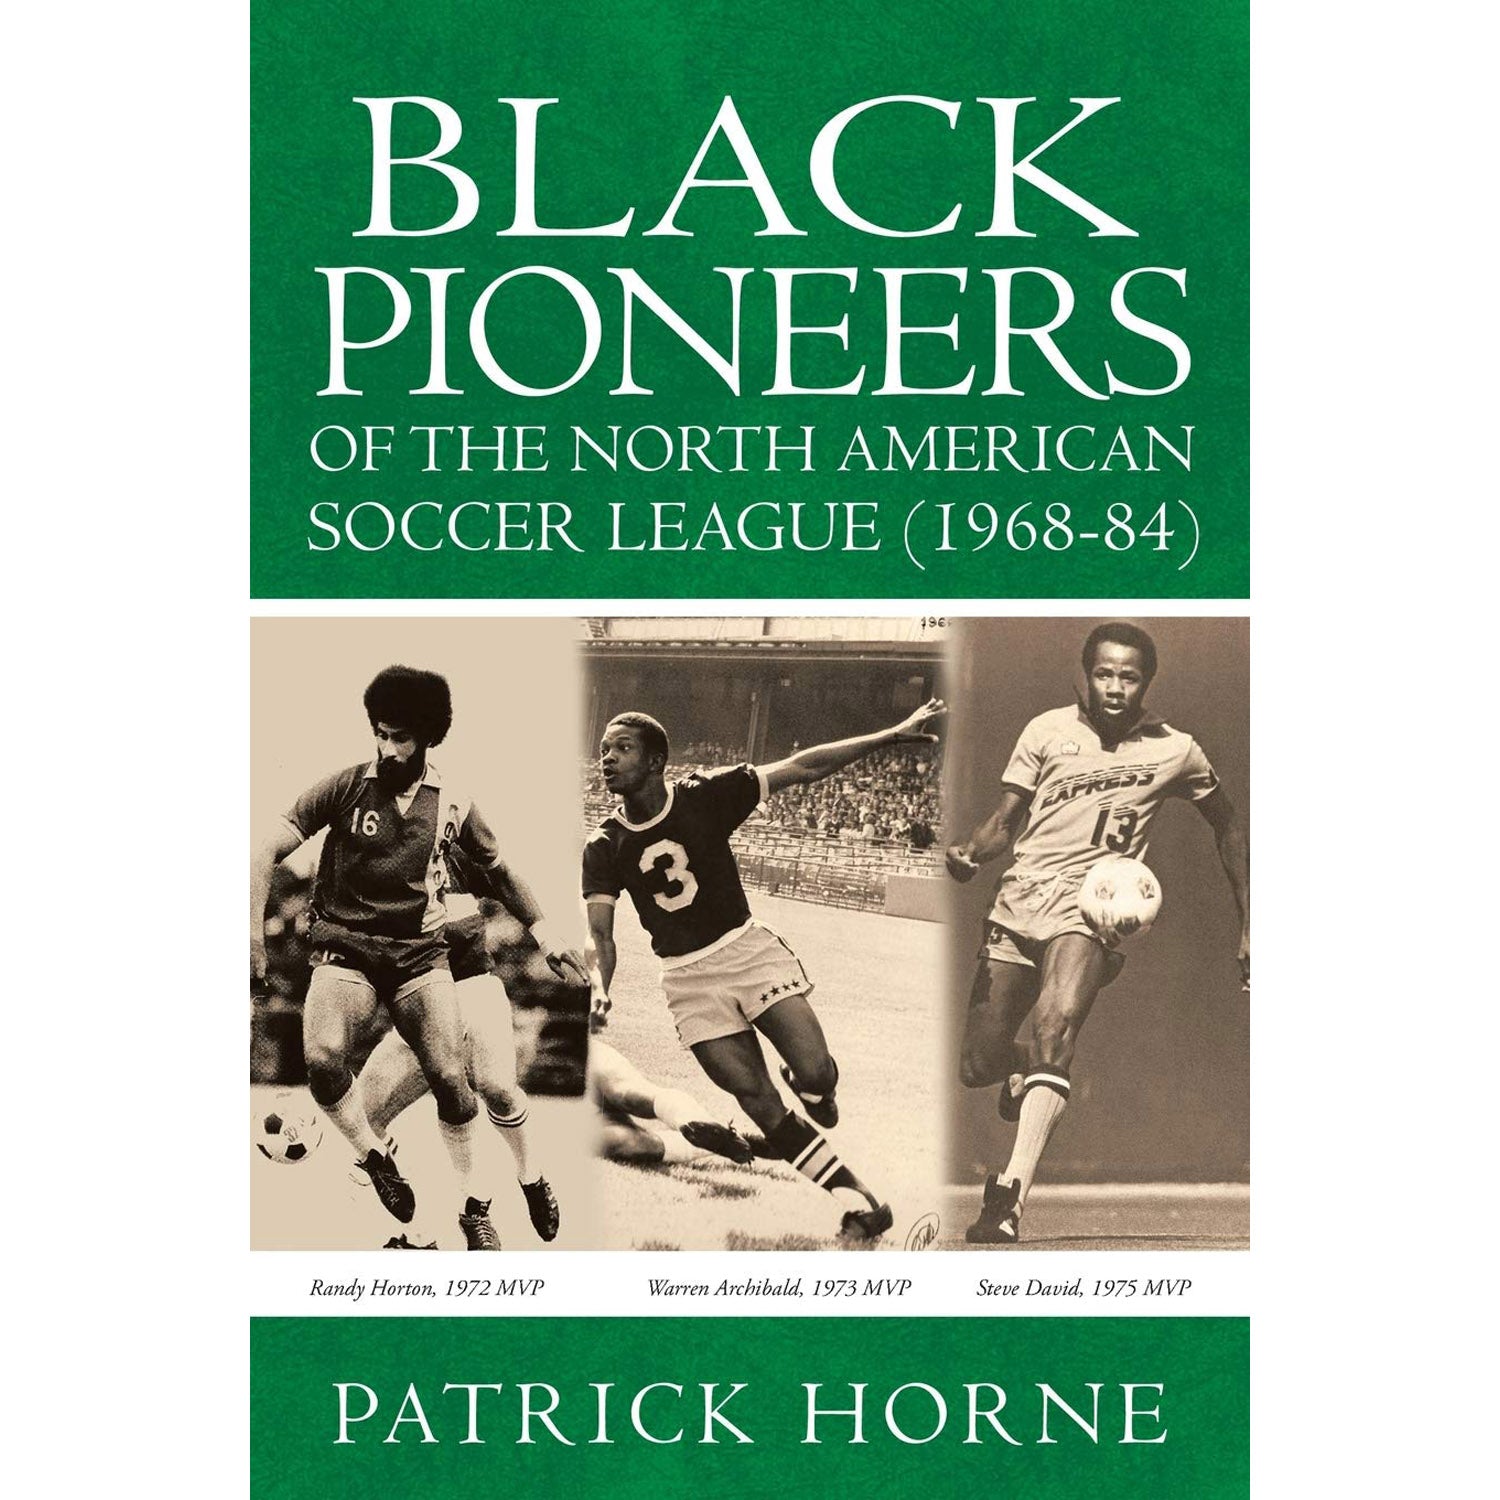 Black Pioneers of the North American Soccer League (1968-1984)